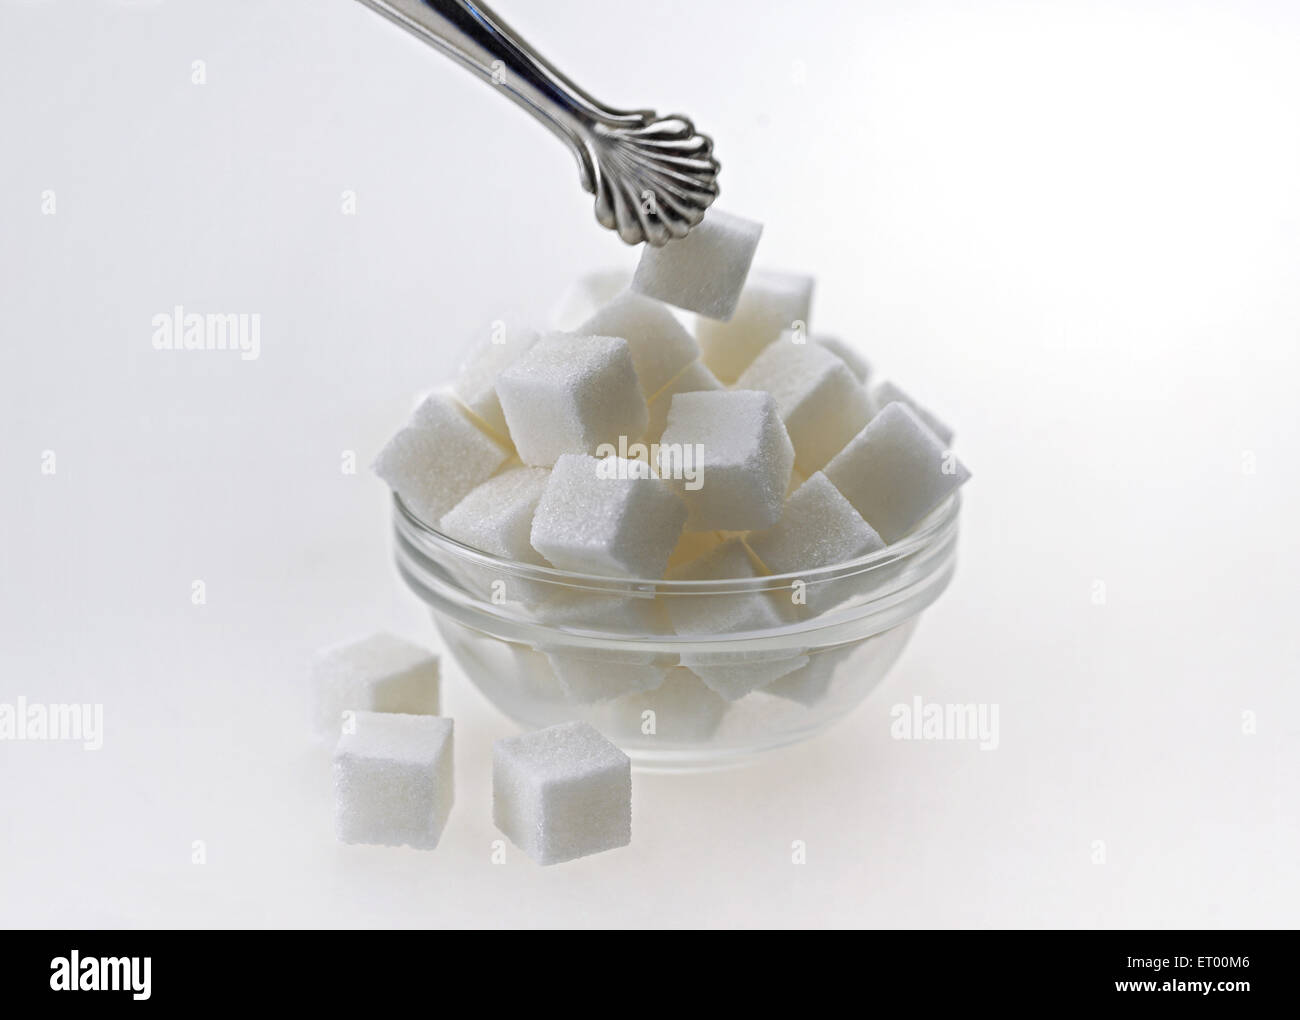 Sugar cubes in a glass bowl with tongs Stock Photo